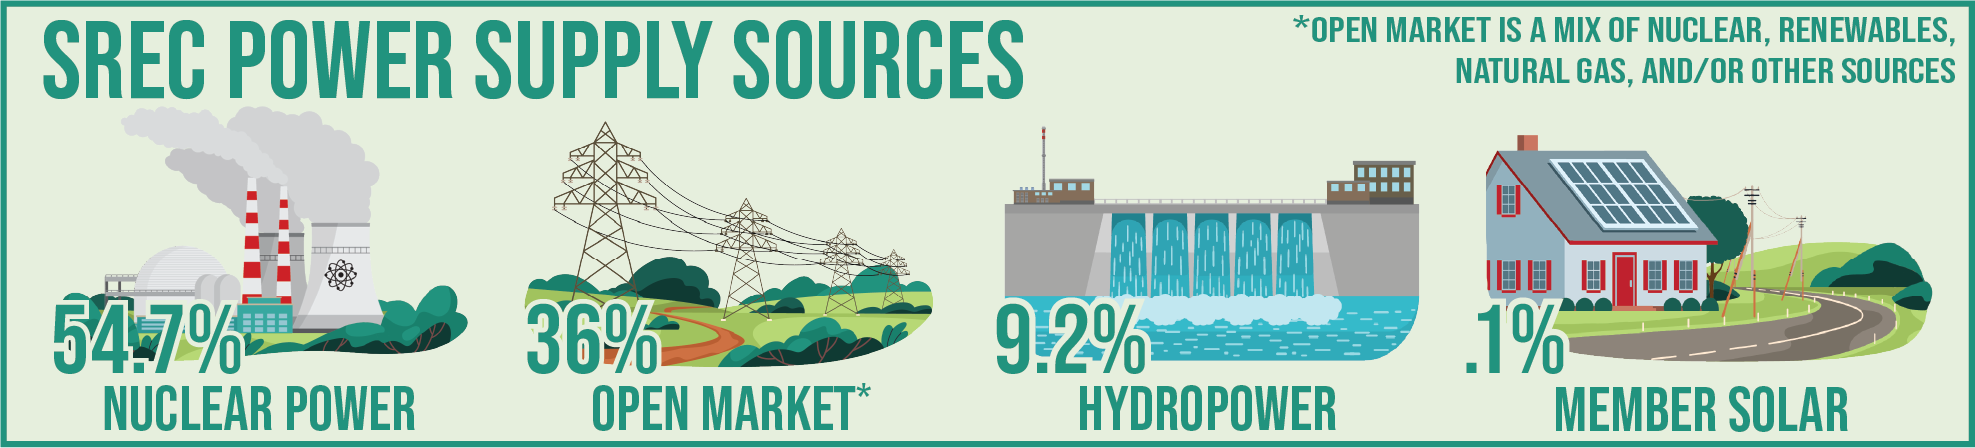 SREC Power Supply Sources: 54.7% Nuclear Power, 36% Open Market*, 9.2% Hydropower, .1% Member Solar | *Open Market is a mix of nuclear, renewables, natural gas, and/or other sources